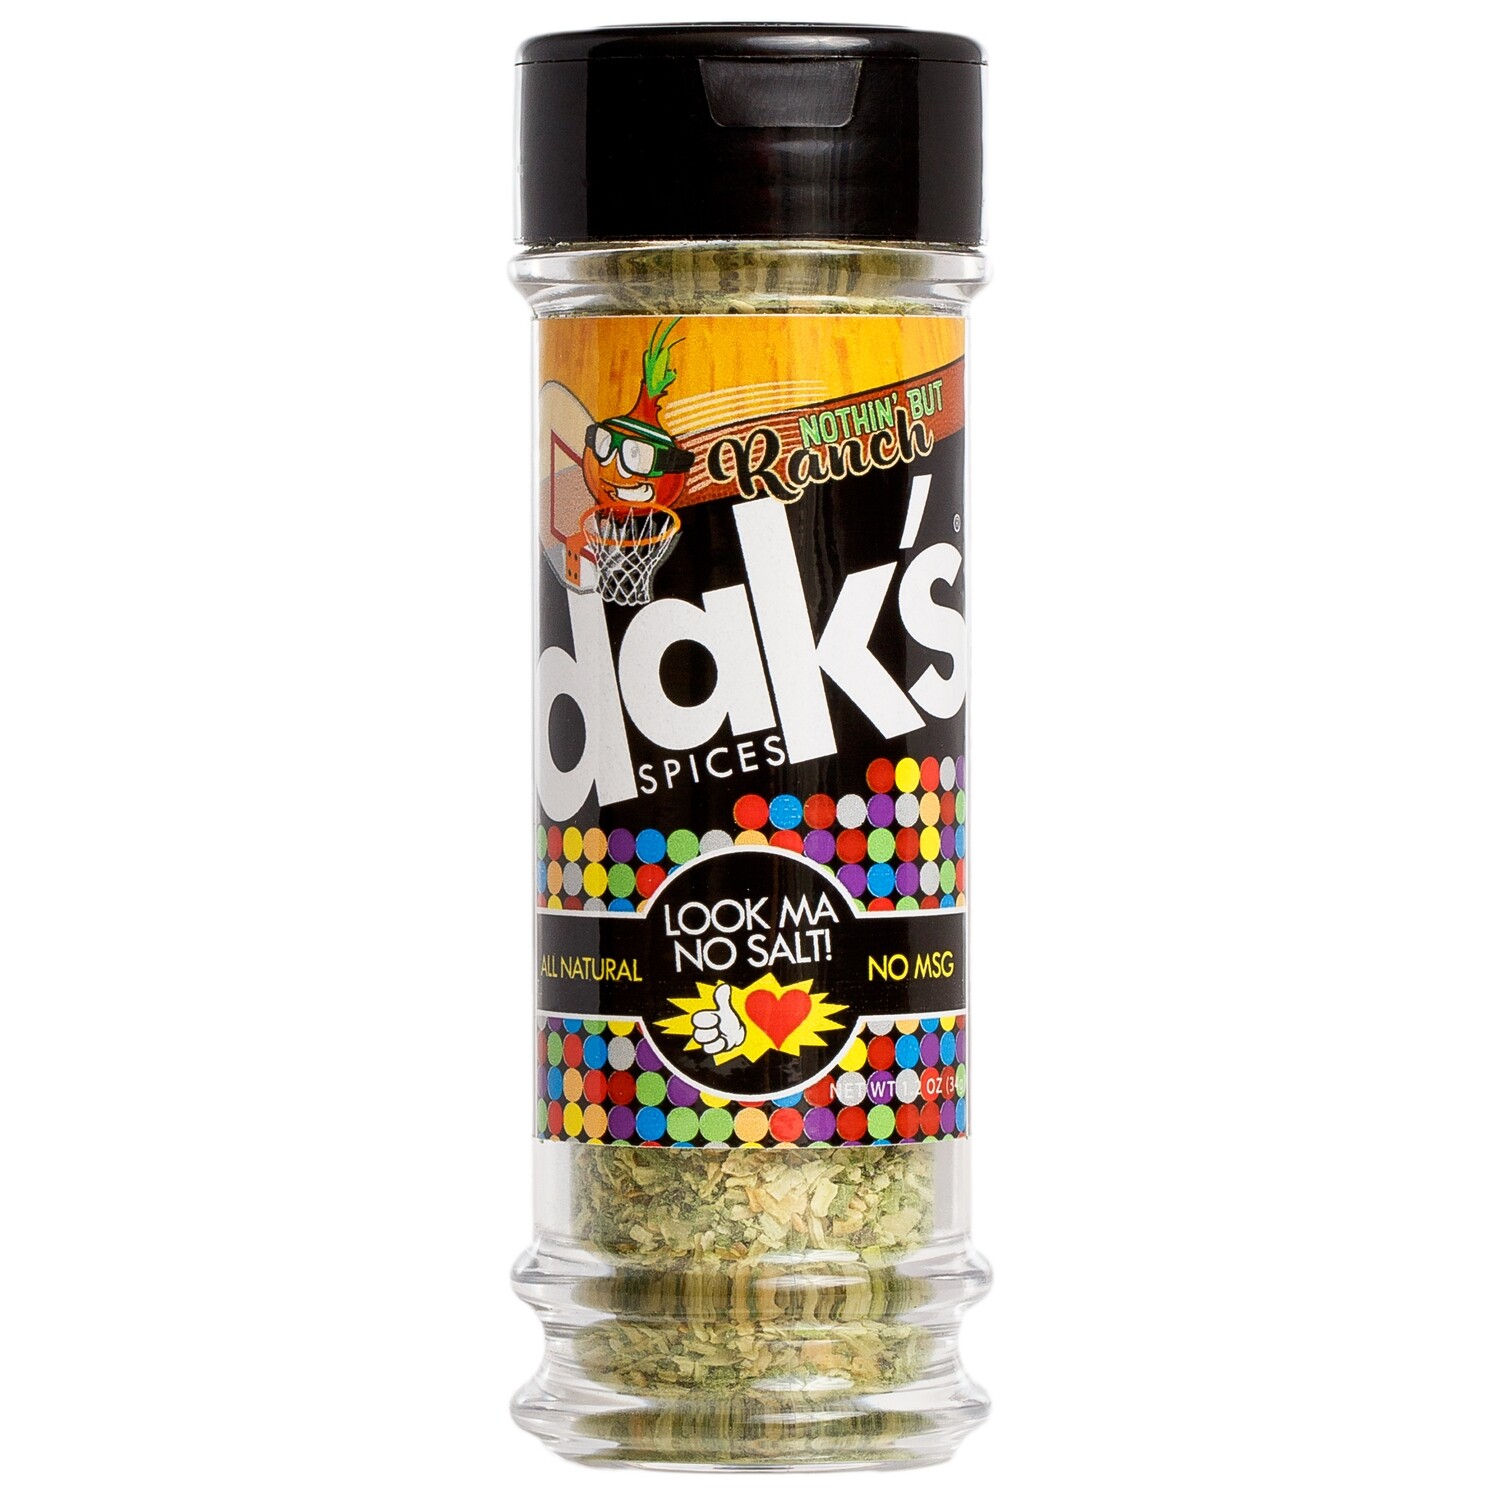 NEW ITEM** DAK'S NOTHIN' BUT RANCH- SALT FREE seasoning to enhance any meal